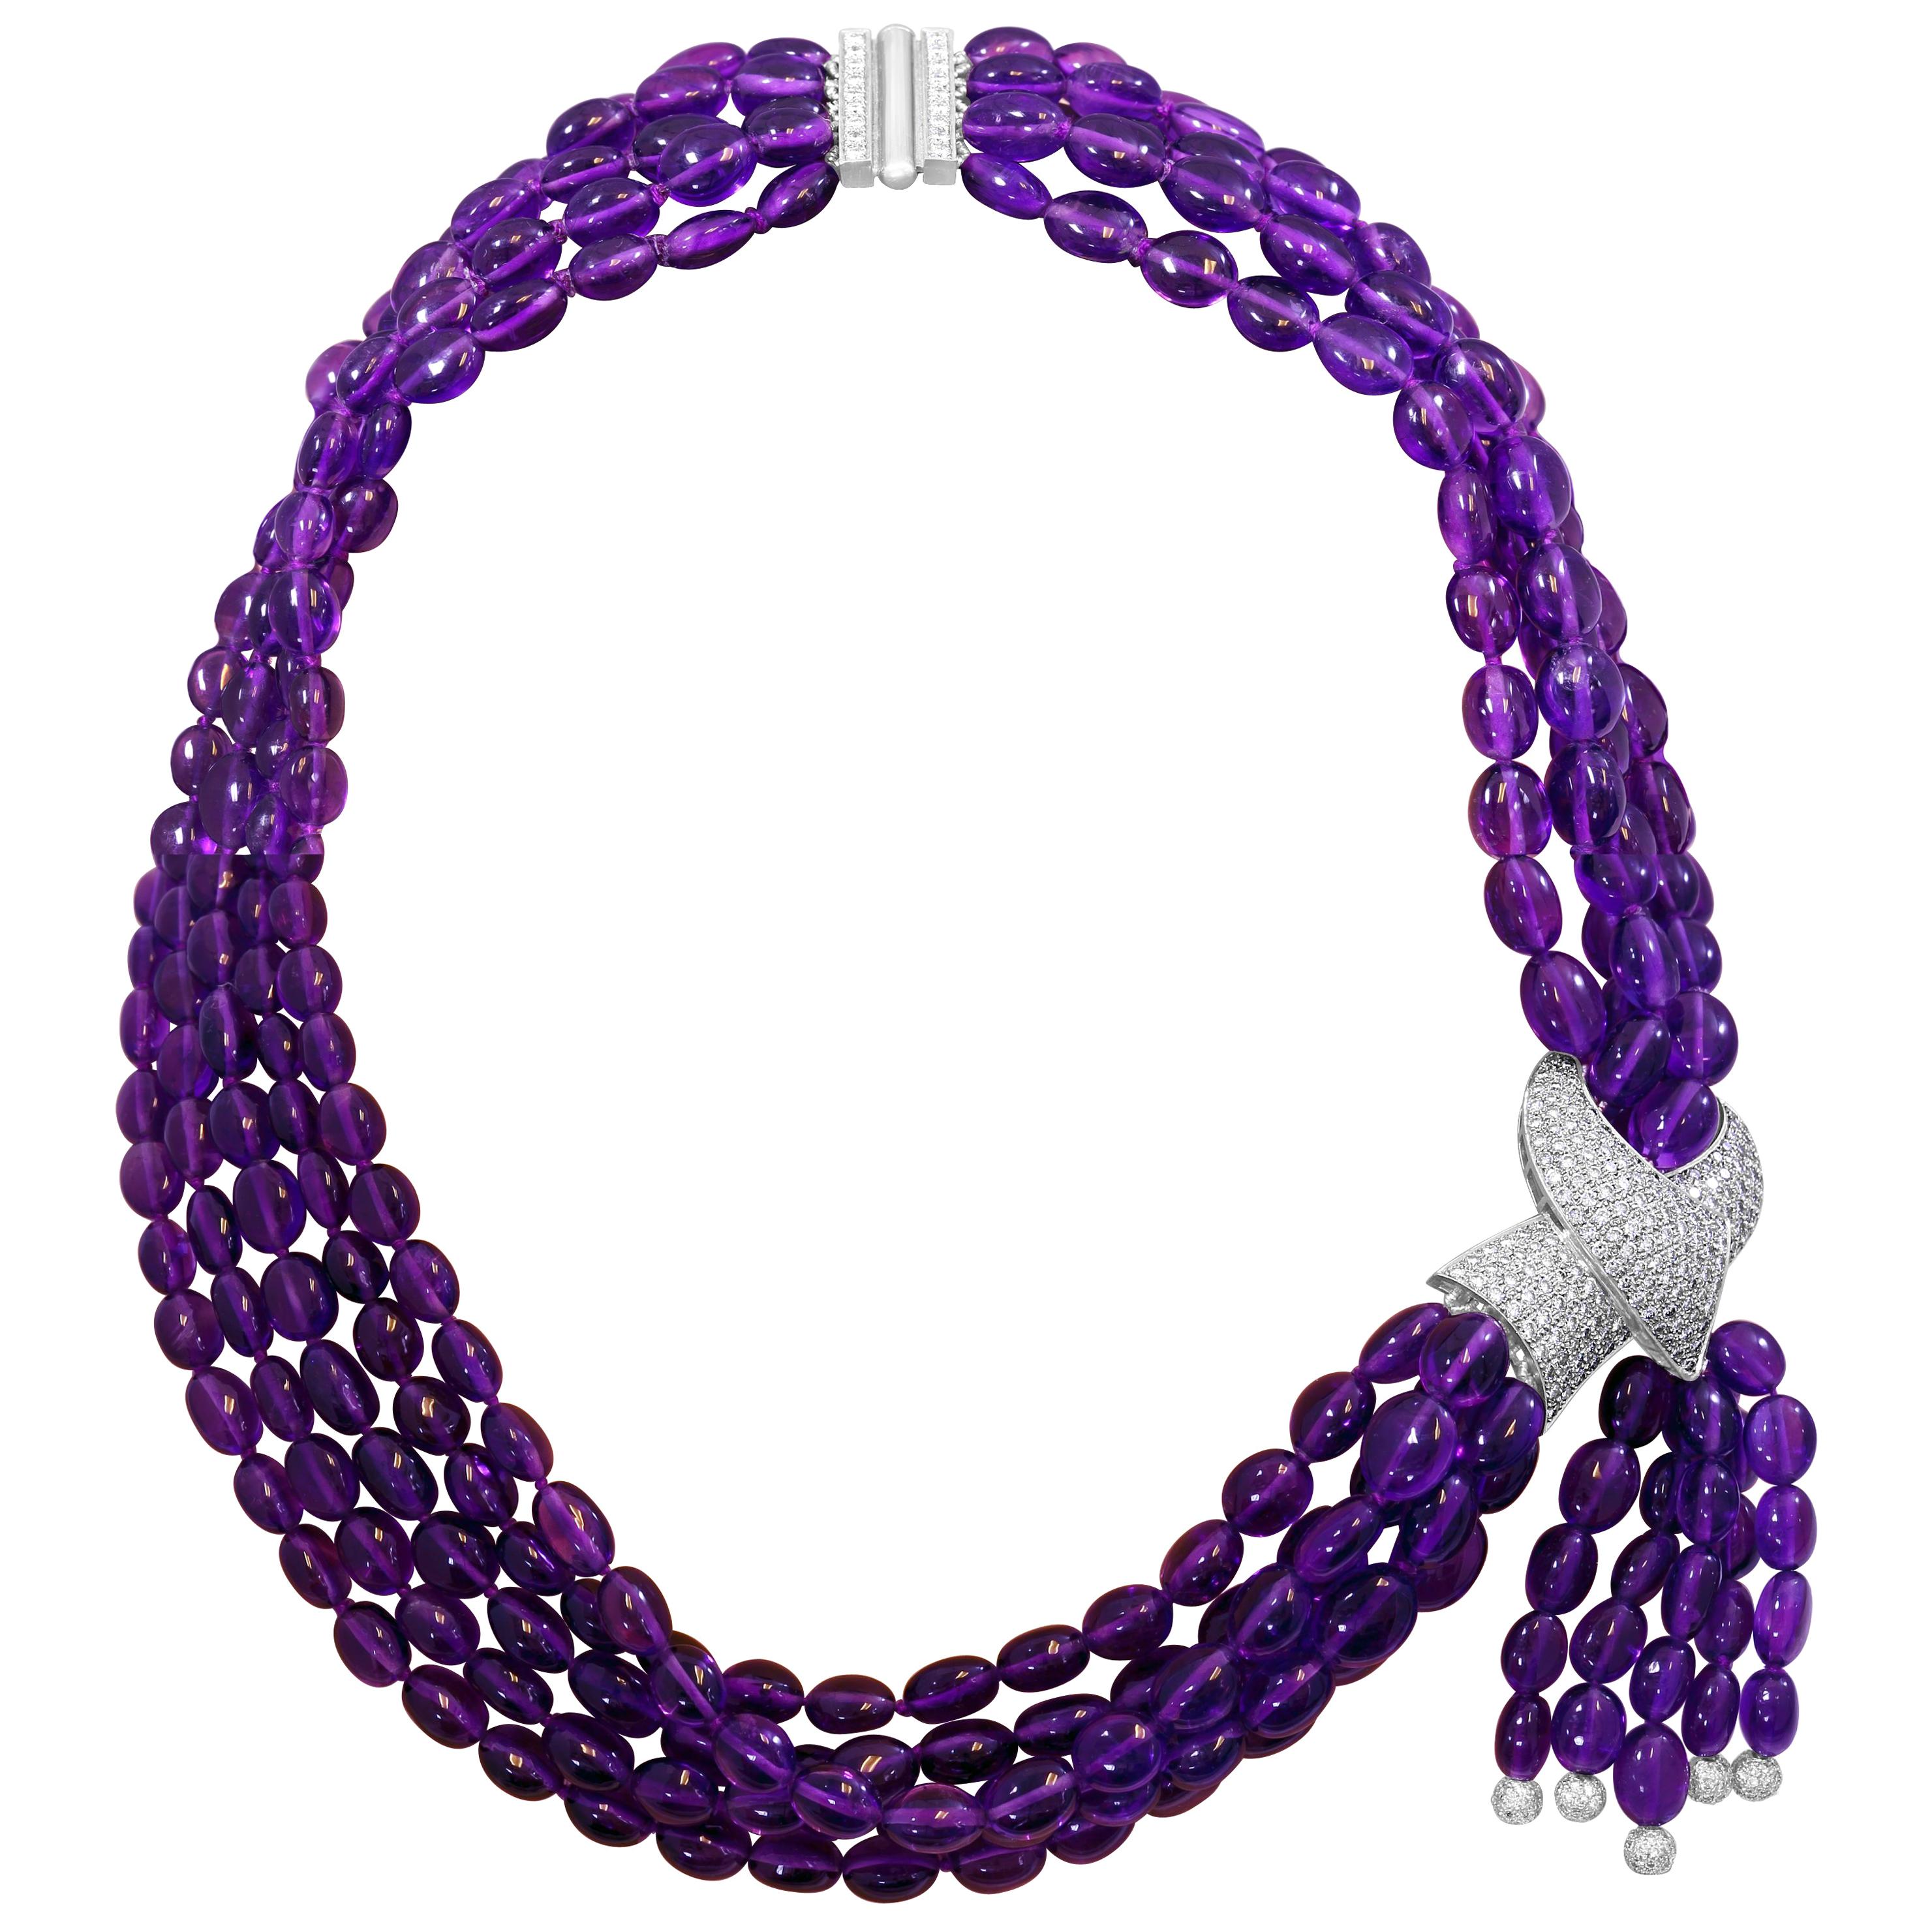 700 Ct Natural Amethyst Multi Layer Bead Necklace in Platinum with 9 Ct Diamonds